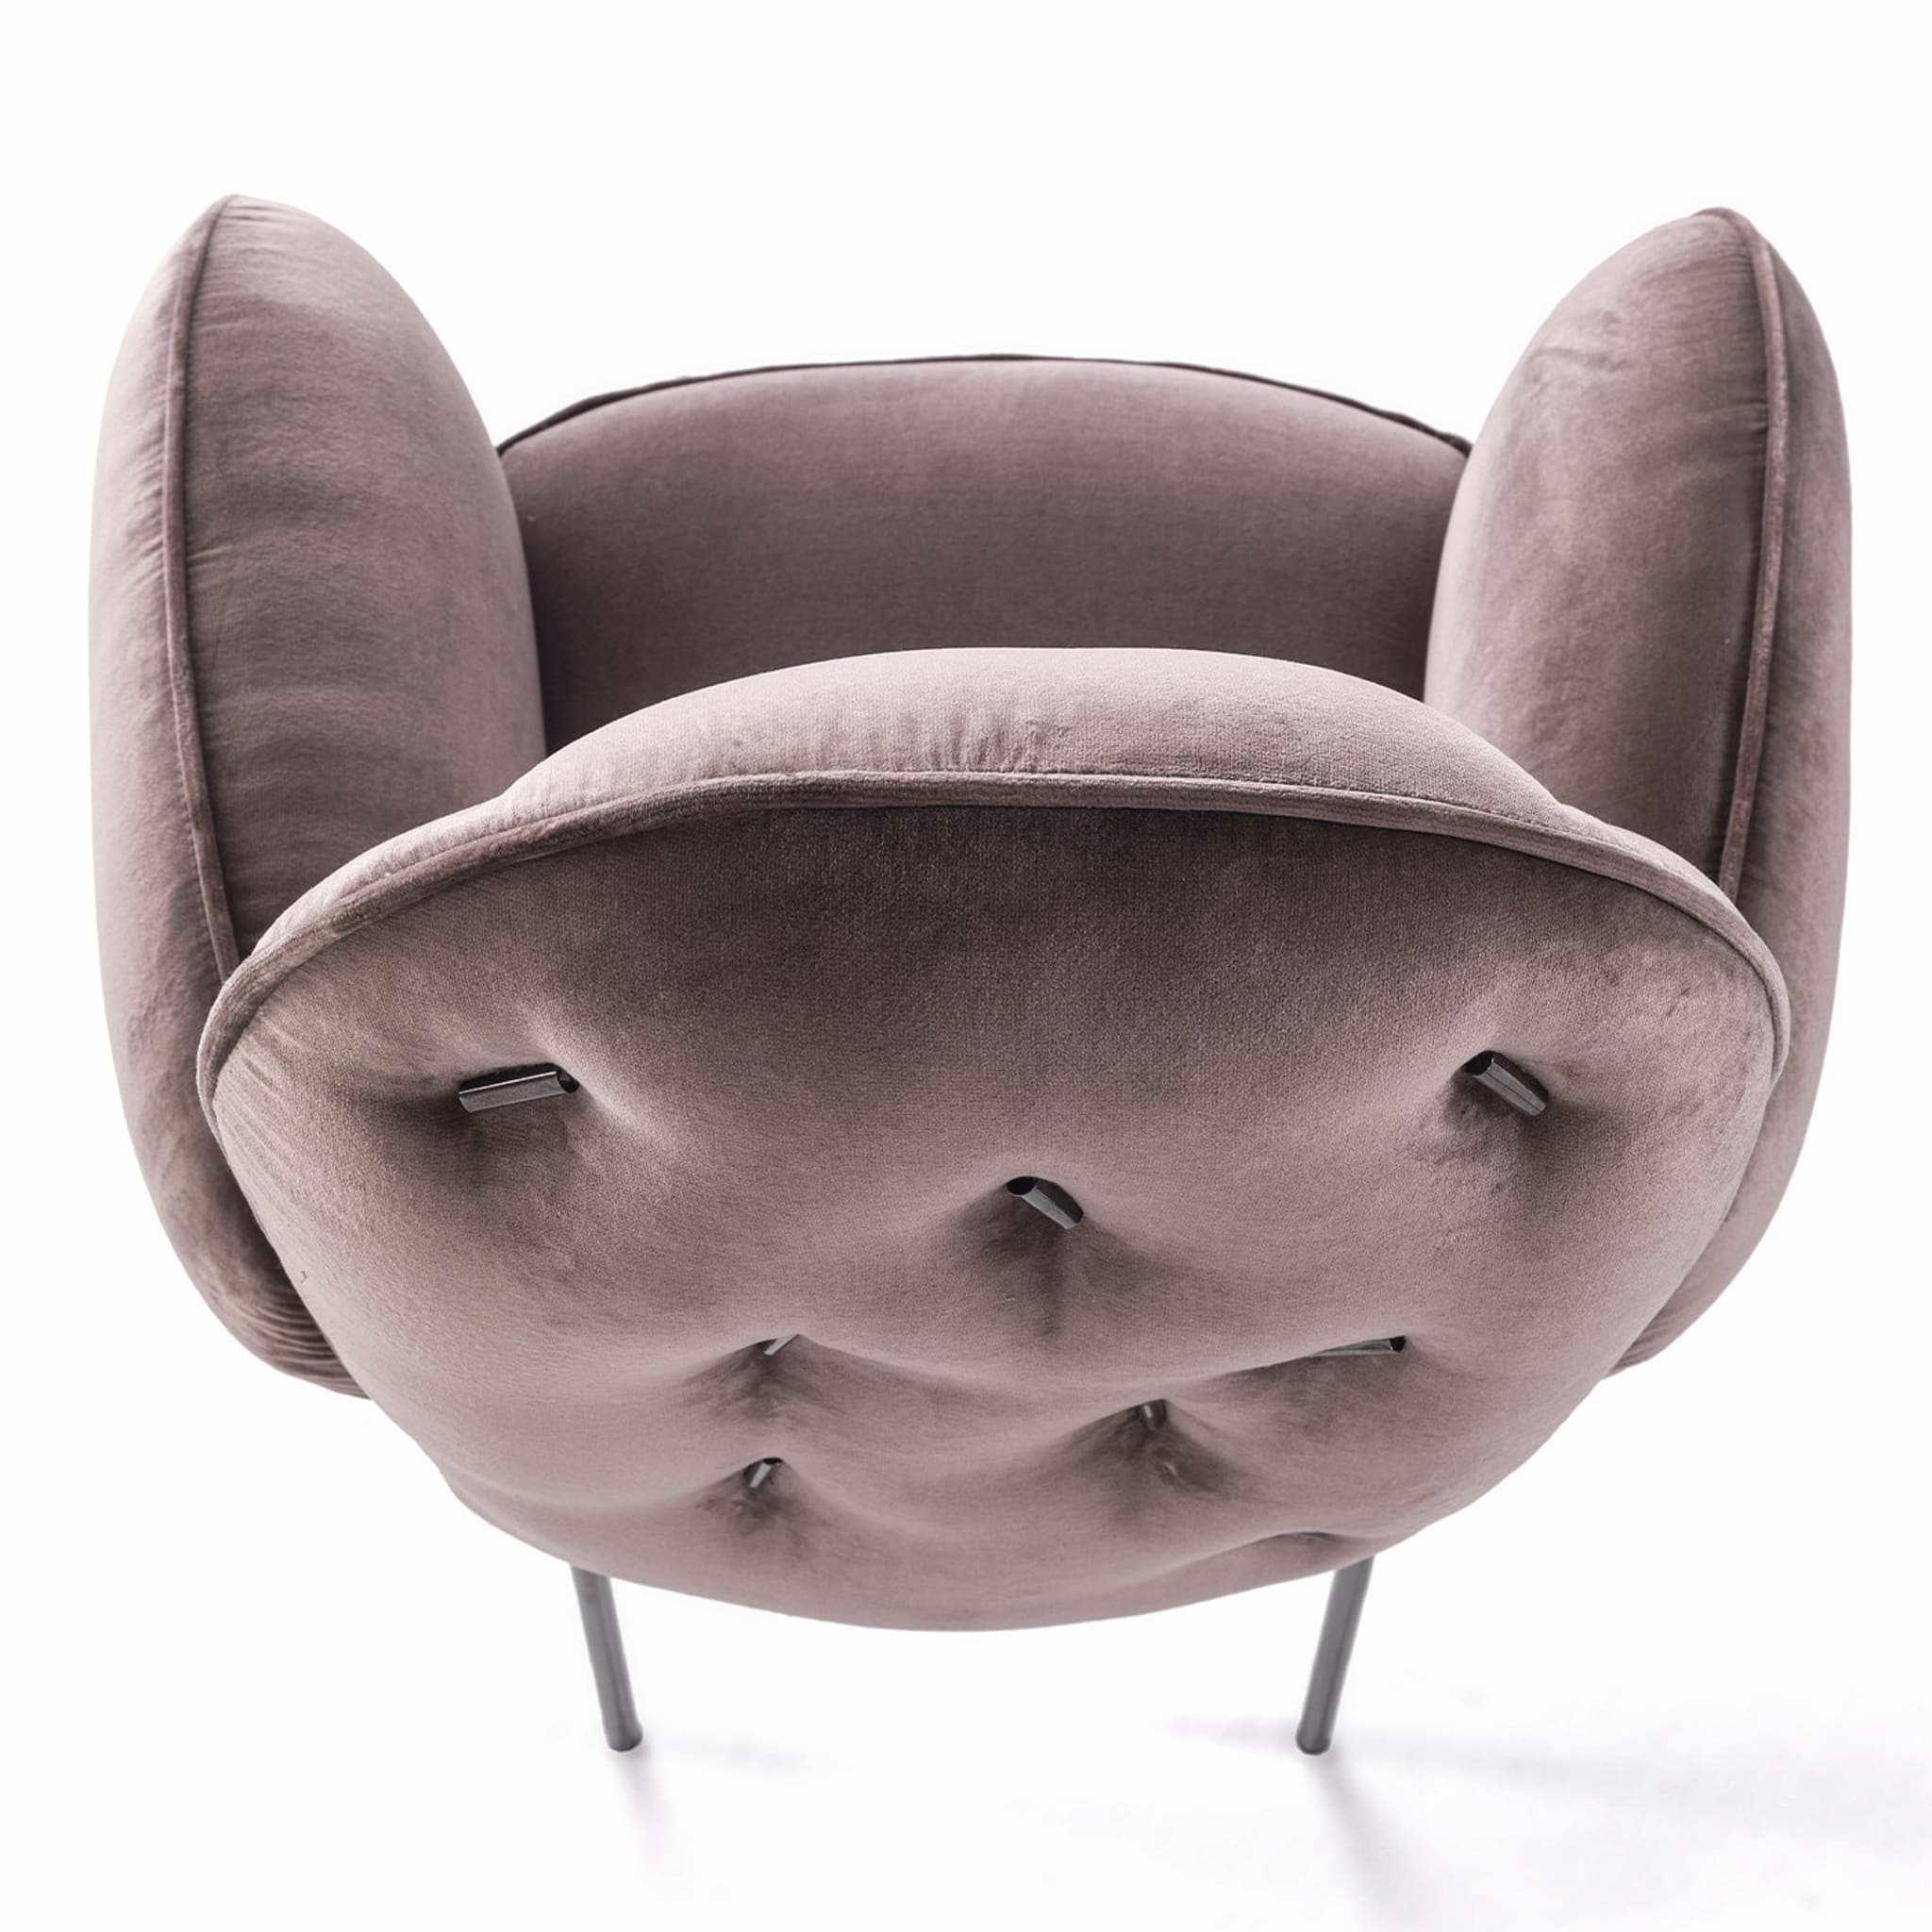 Ttemic Lilac Chair with Arms by Matteo Cibic - Alternative view 2